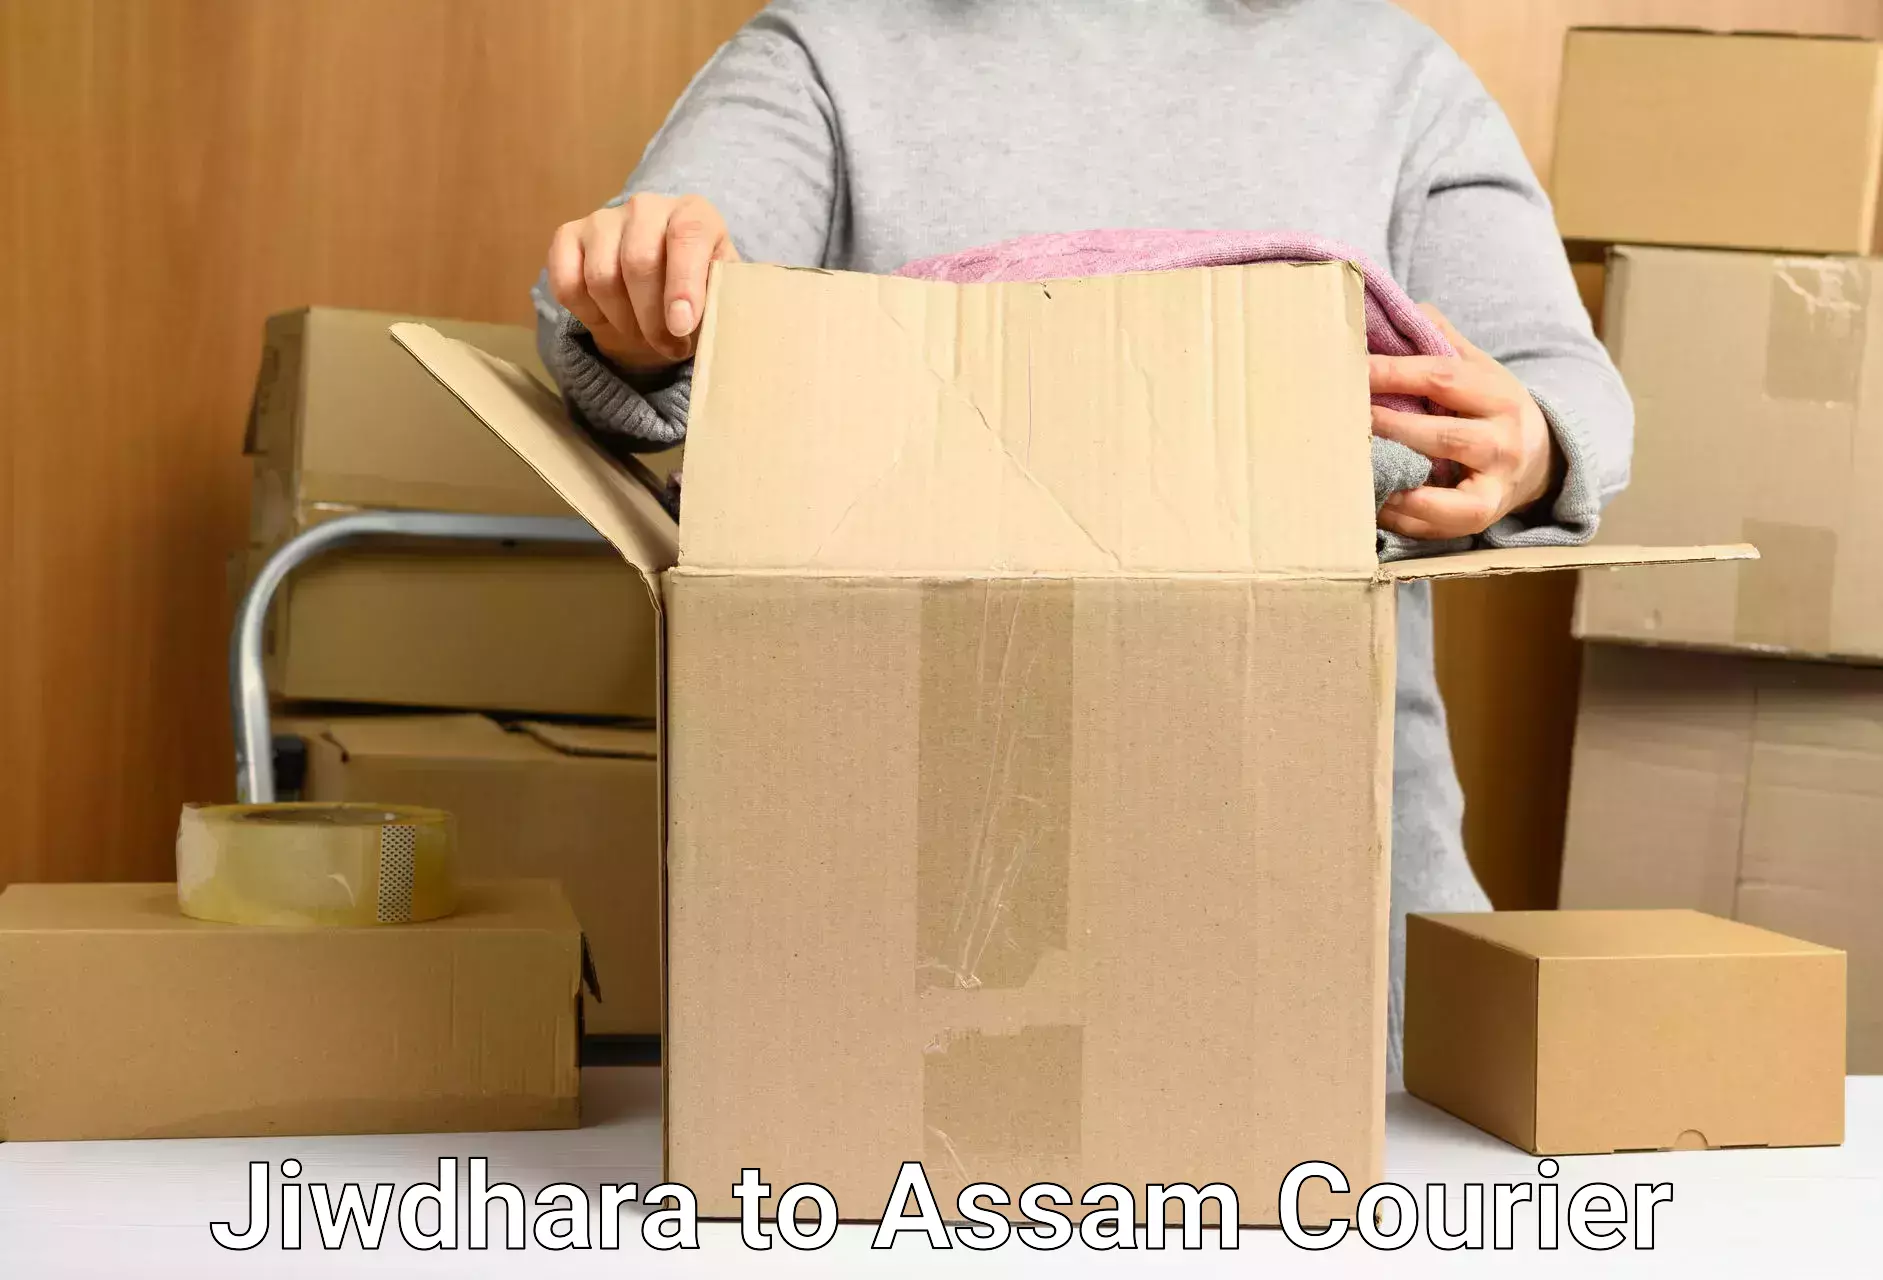 Next day courier in Jiwdhara to Assam